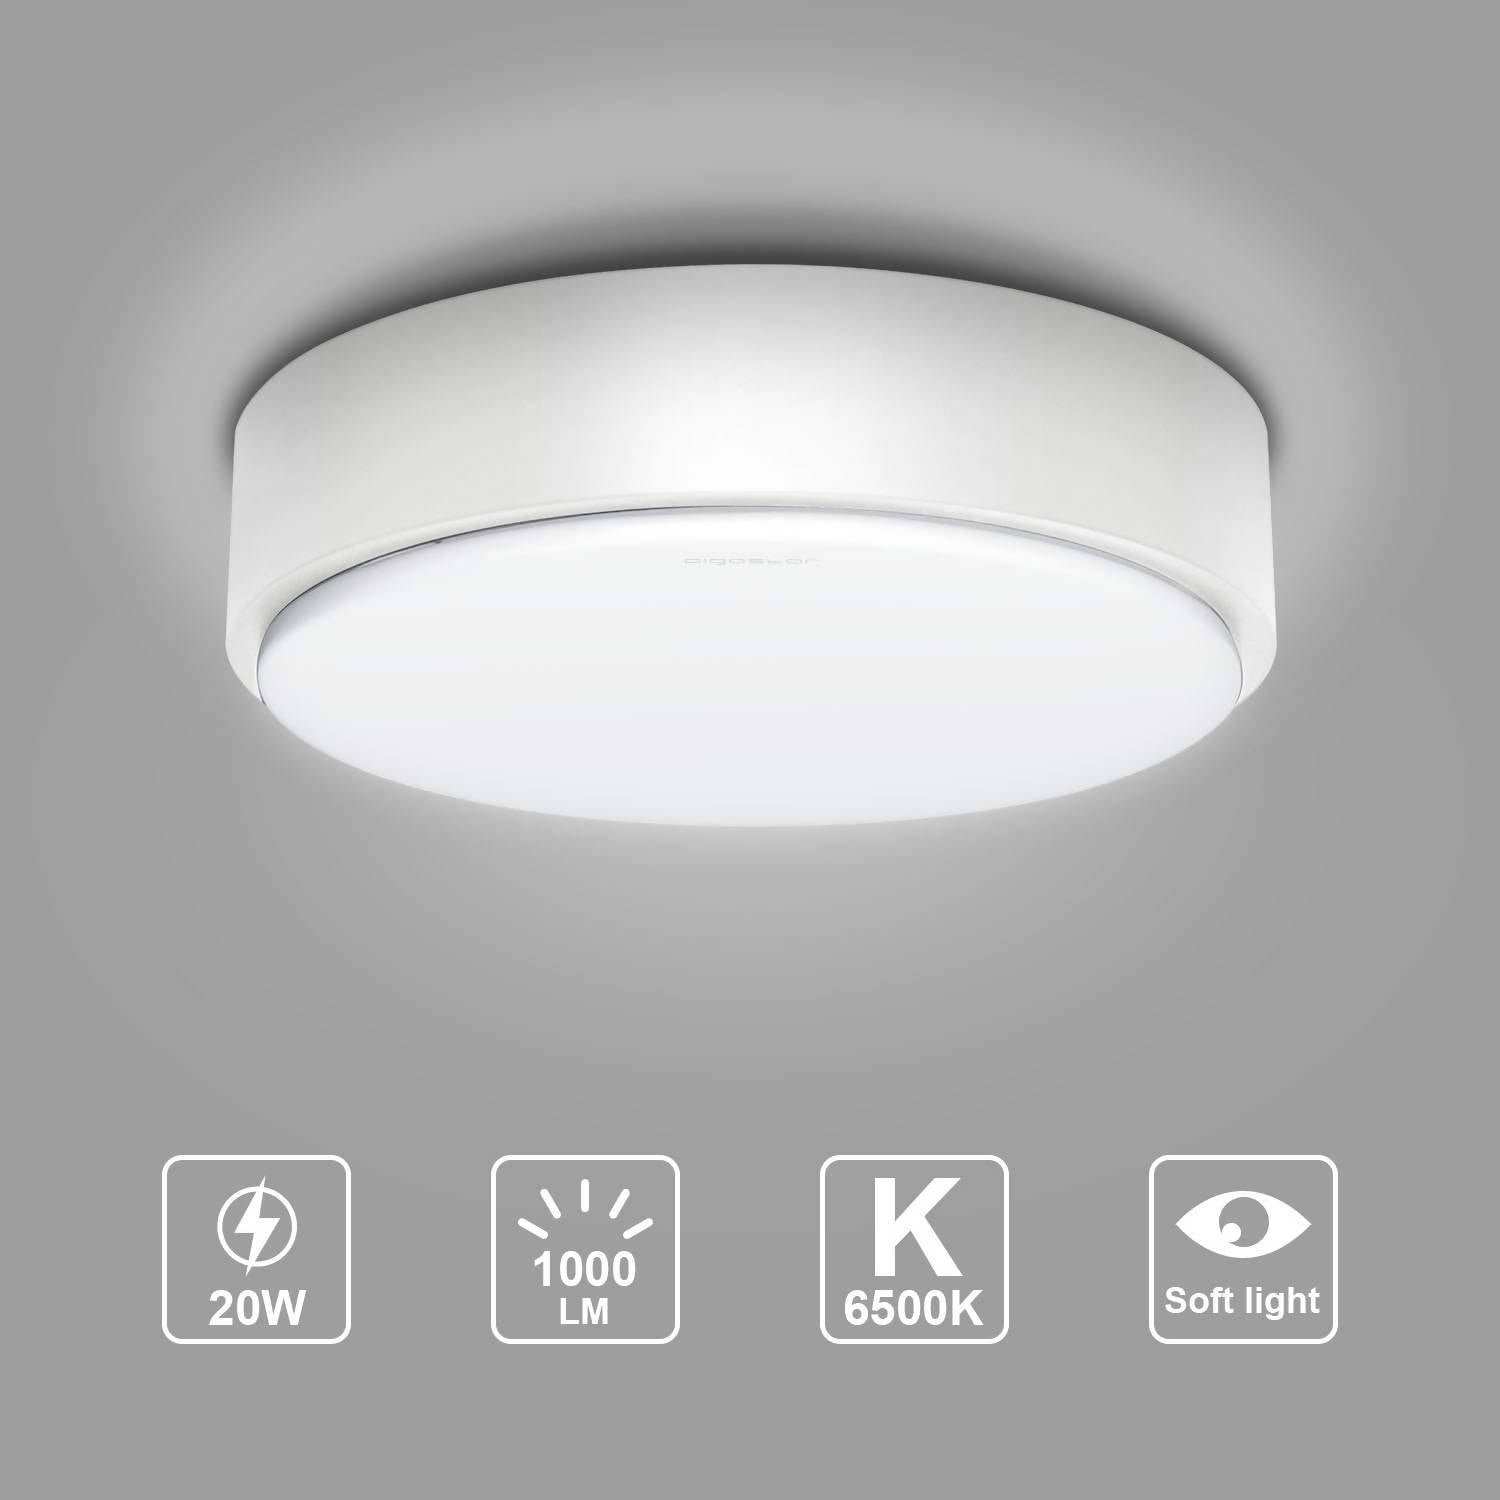 LED Ceiling Light Cool White 20 W Ceiling Light Metal Board 6500 K 1000 lm for Kitchen Corridor Office Bedroom Dining Room Living Room [Energy Class A+]